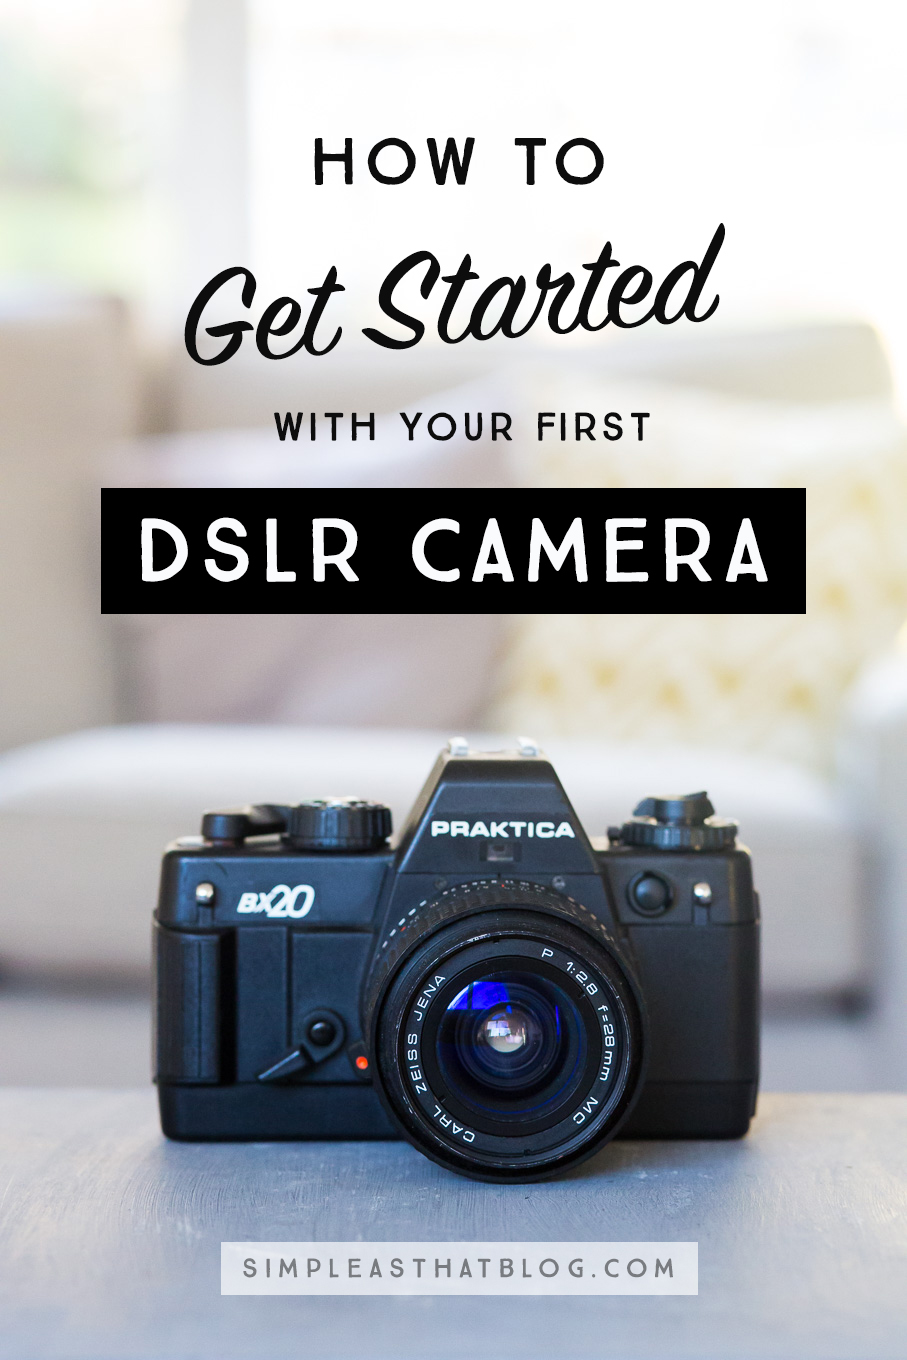 Follow these simple first steps and get familiar with your new camera!